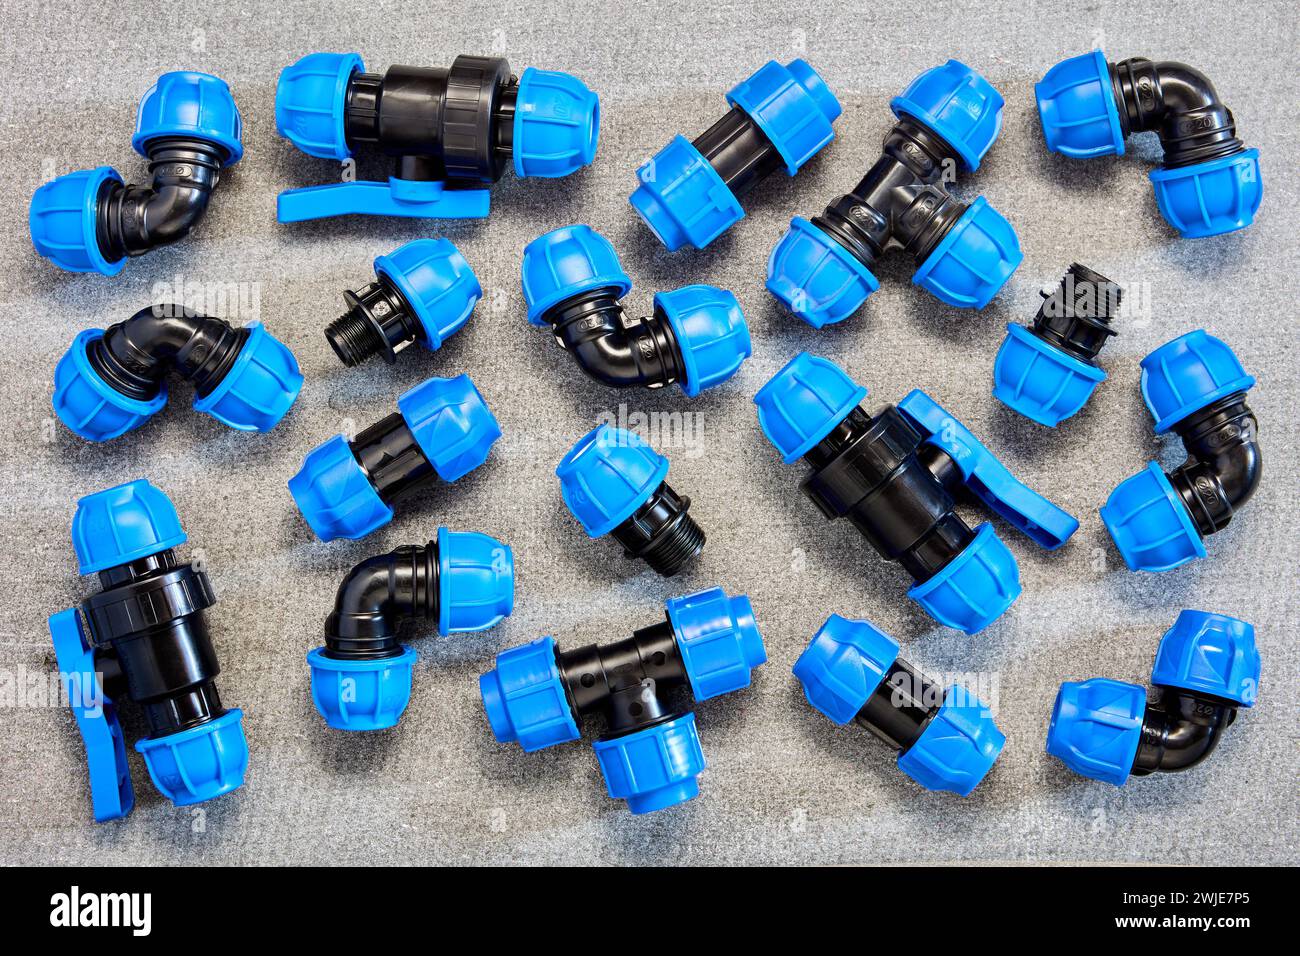 Polypropylene compression clamping fittings for pipeline system made of HDPE pipes laid out on gray slate sheet. Stock Photo